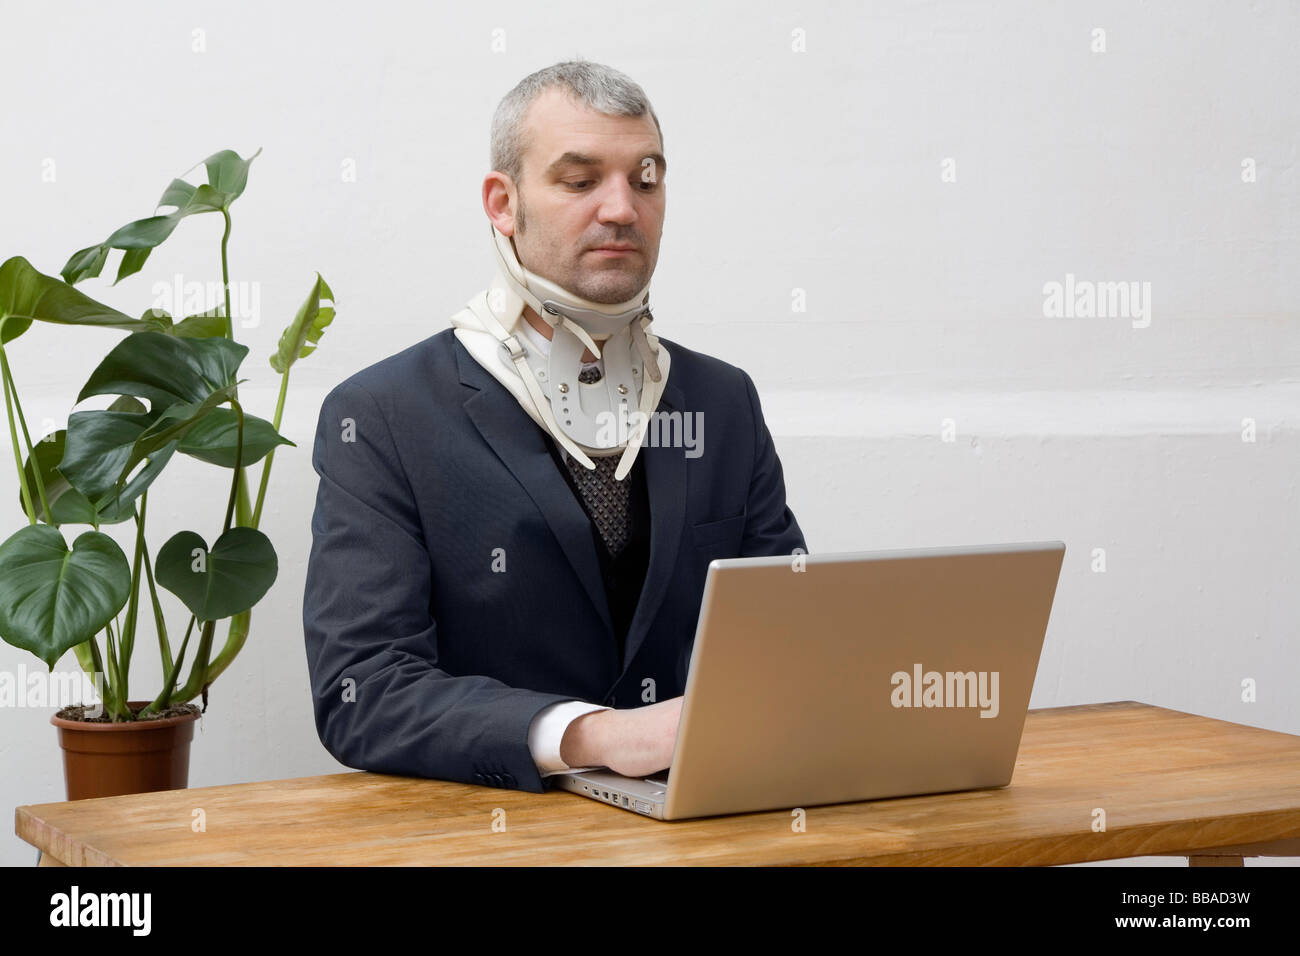 A businessman with a neck brace working on a laptop Stock Photo